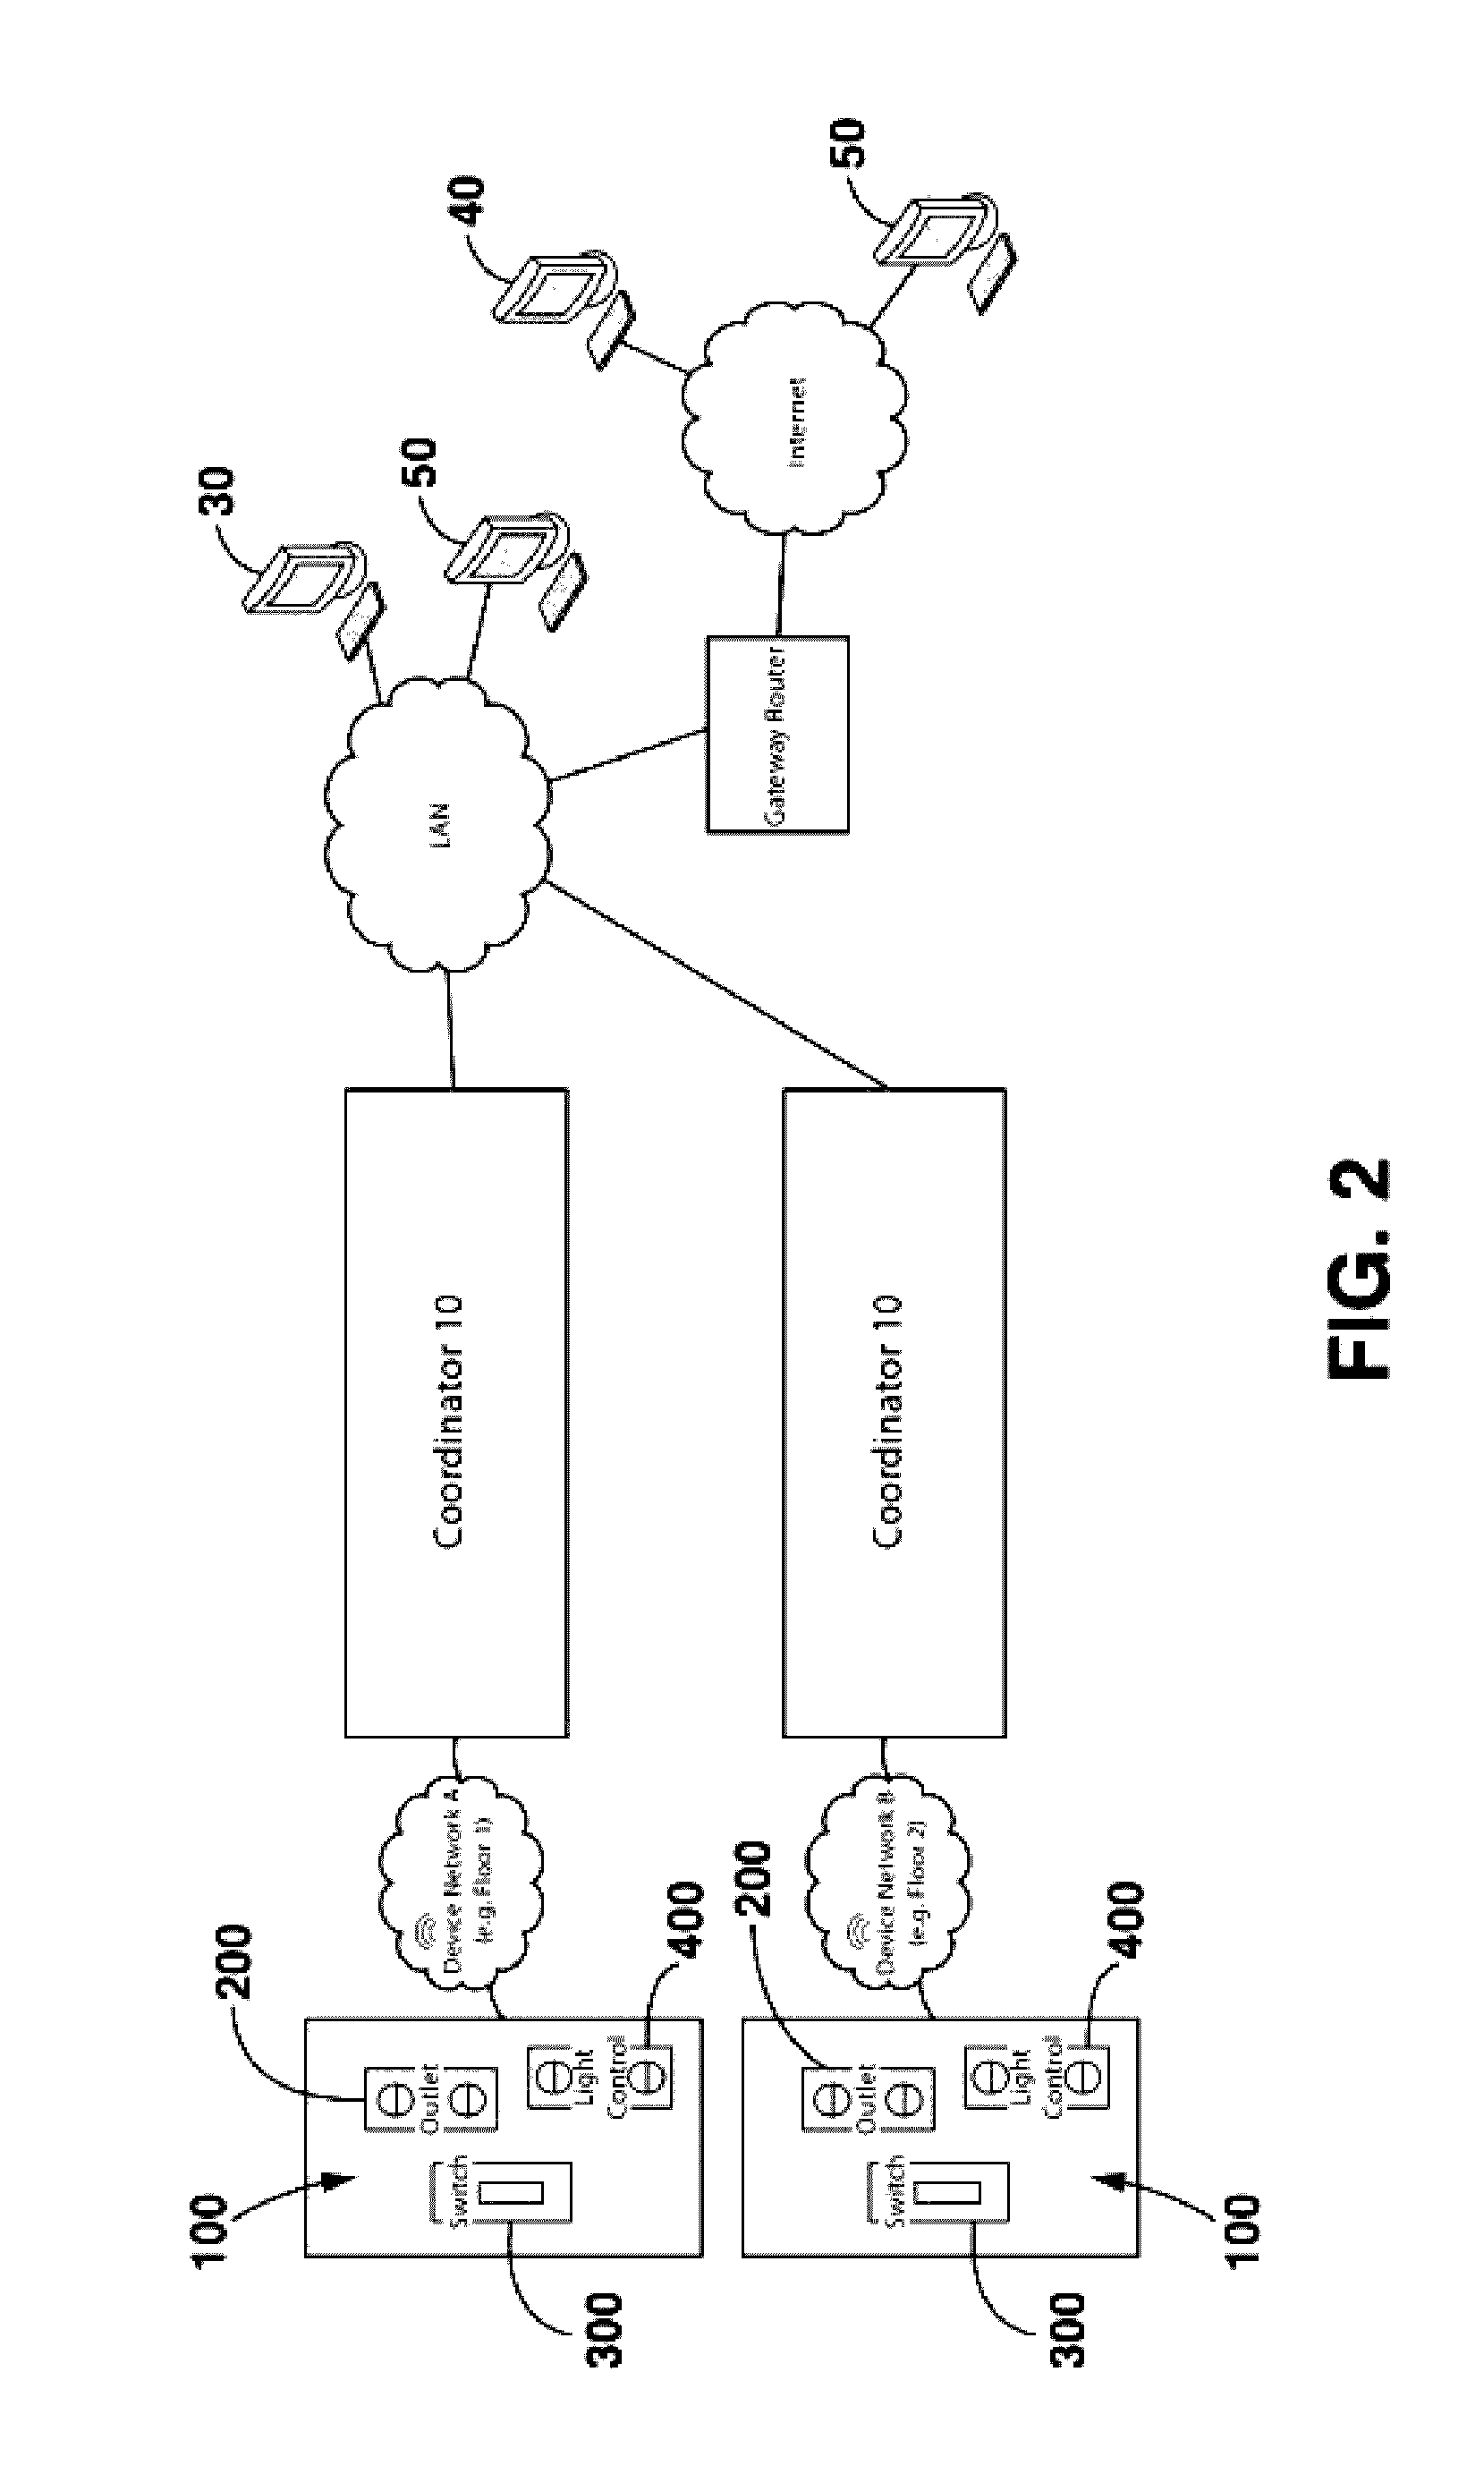 System and method for providing and managing electricity